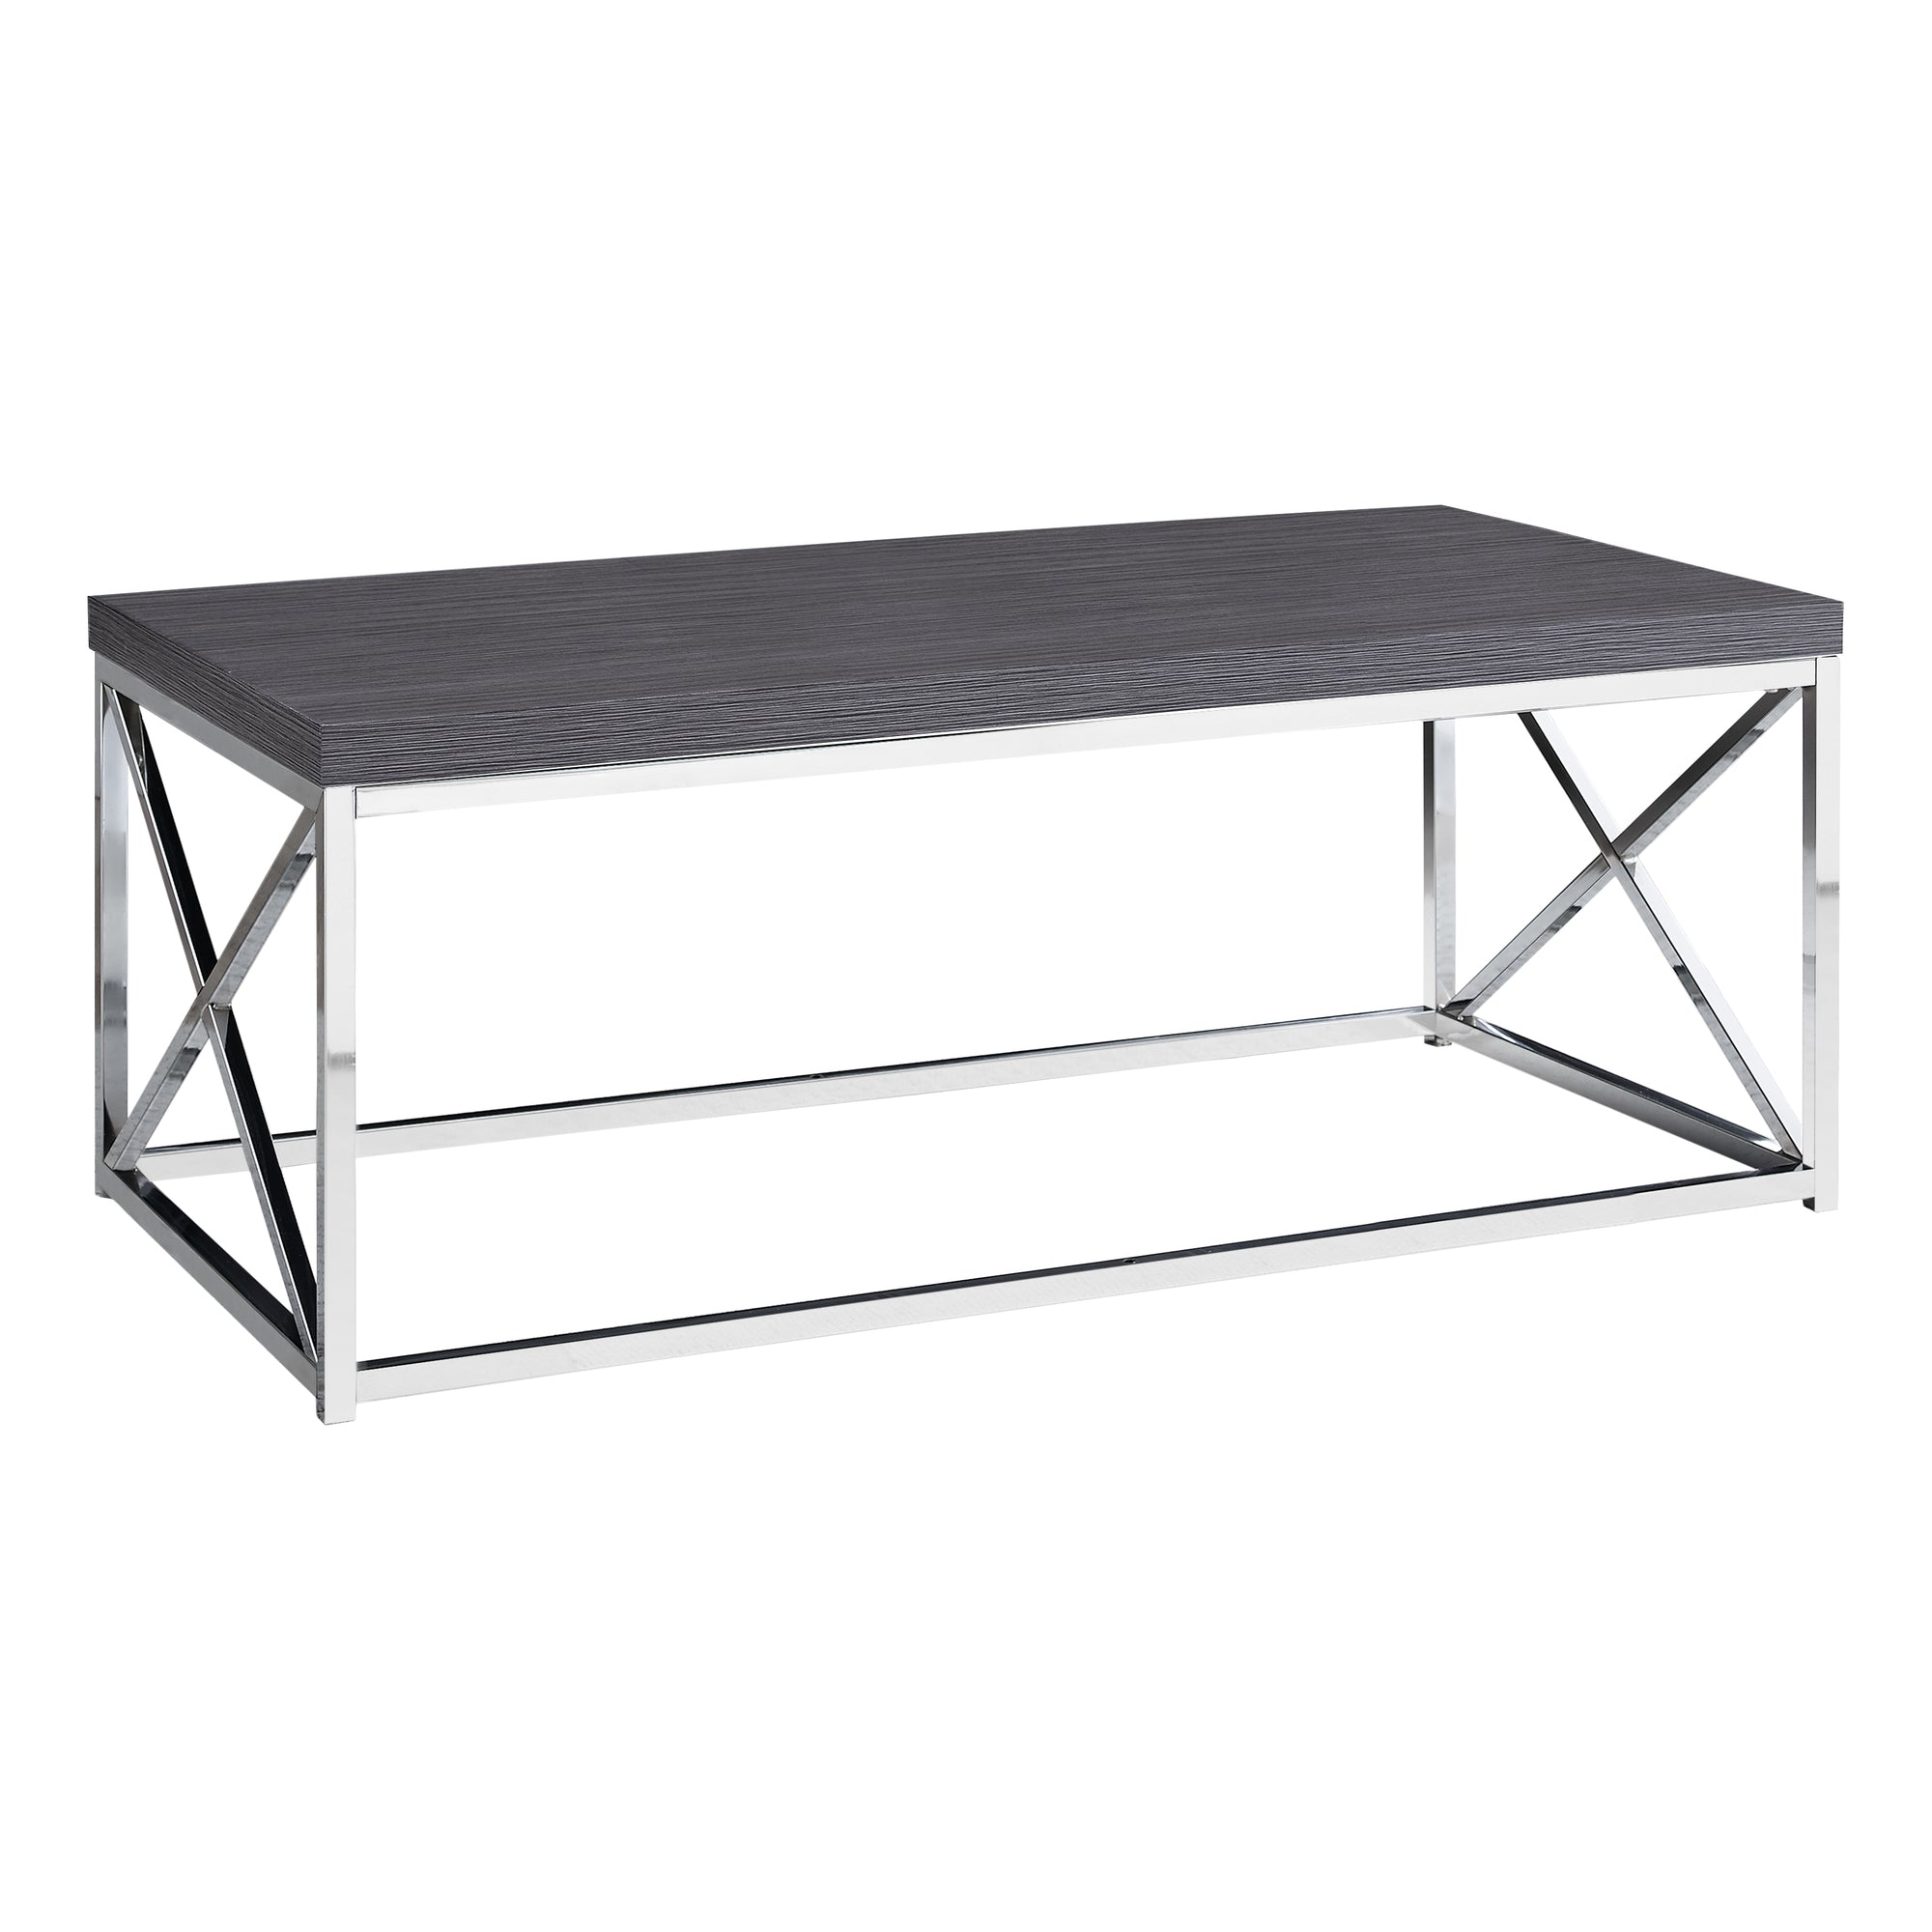 MN-743225    Coffee Table, Accent, Cocktail, Rectangular, Living Room, Metal Frame, Laminate, Grey, Chrome, Contemporary, Modern